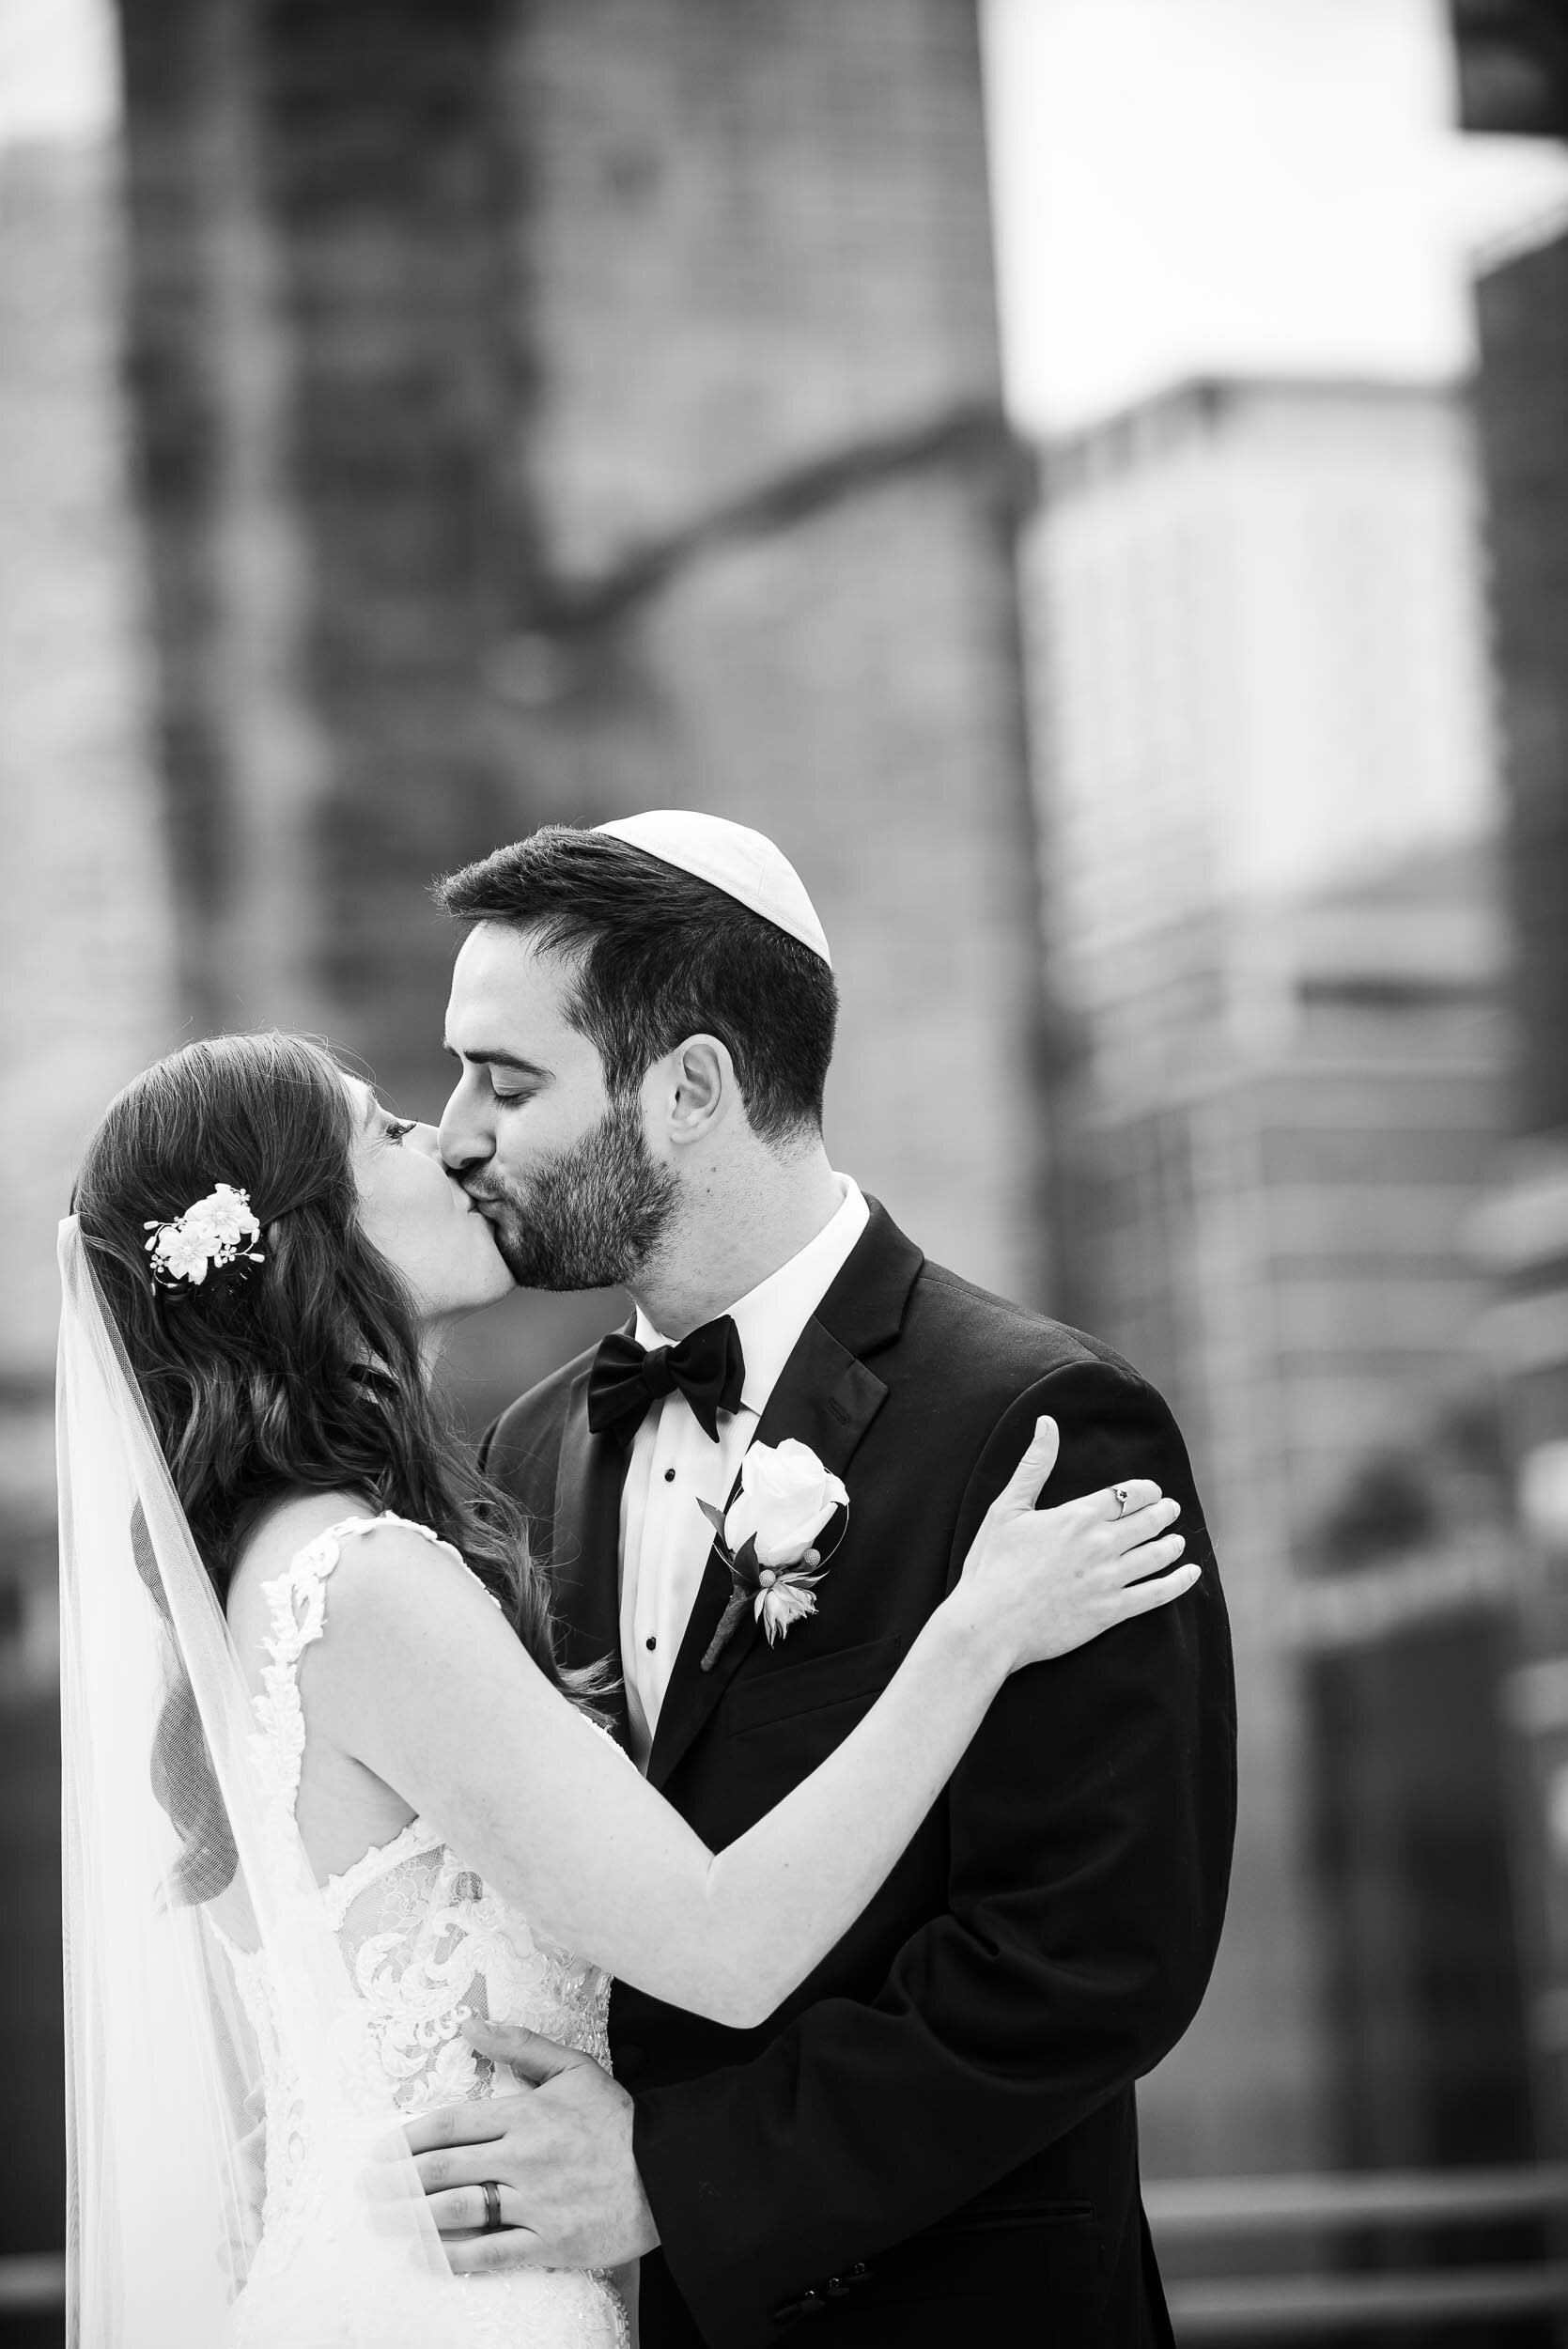 Black and white wedding portrait: Loews Chicago Hotel Wedding captured by J. Brown Photography